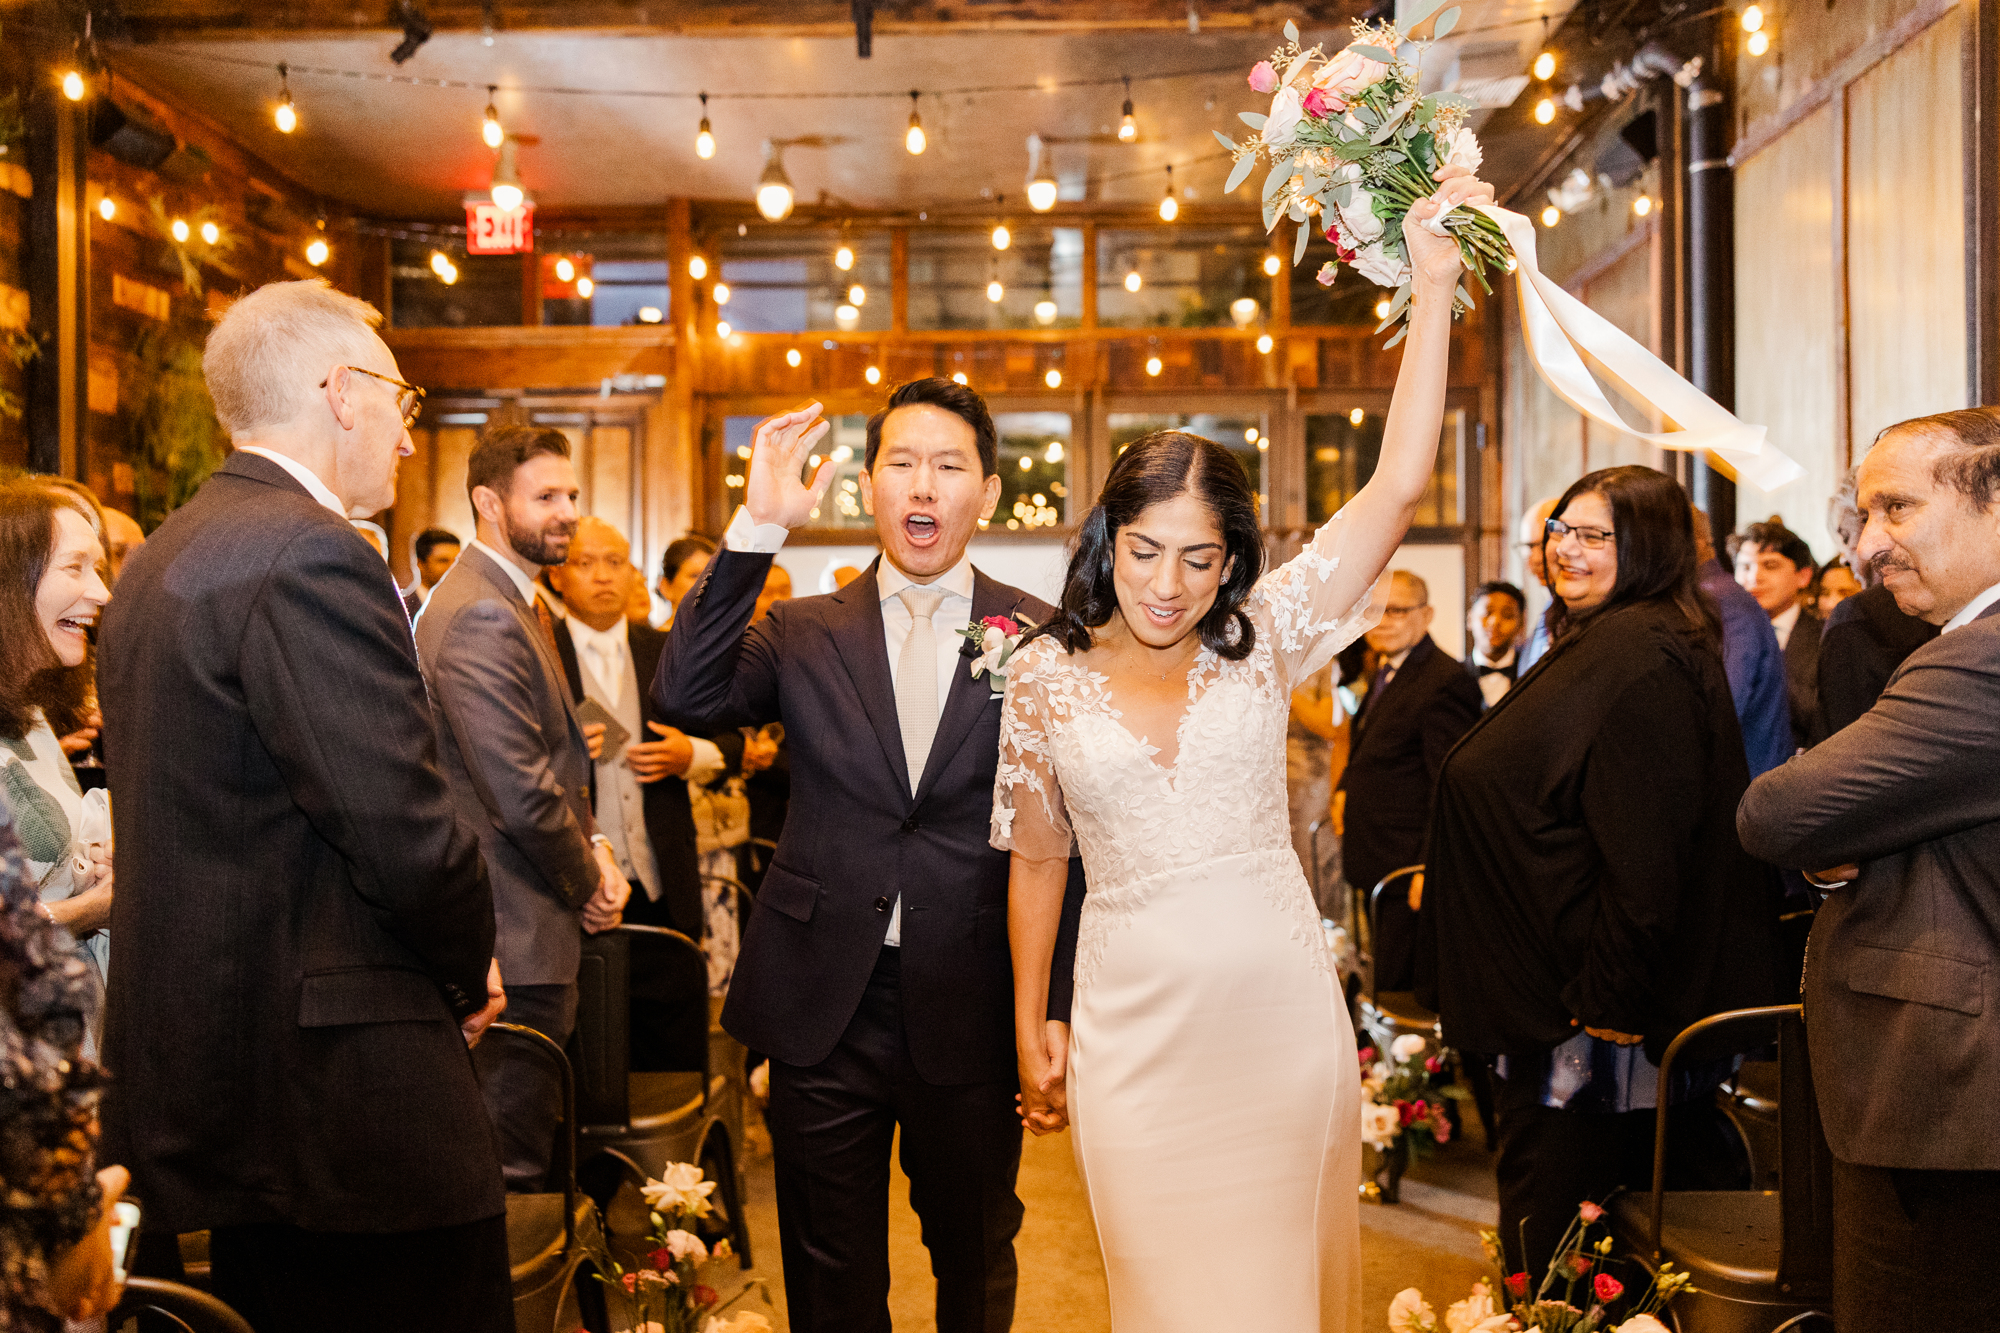 Rustic NYC Event Venues for Winter Weddings